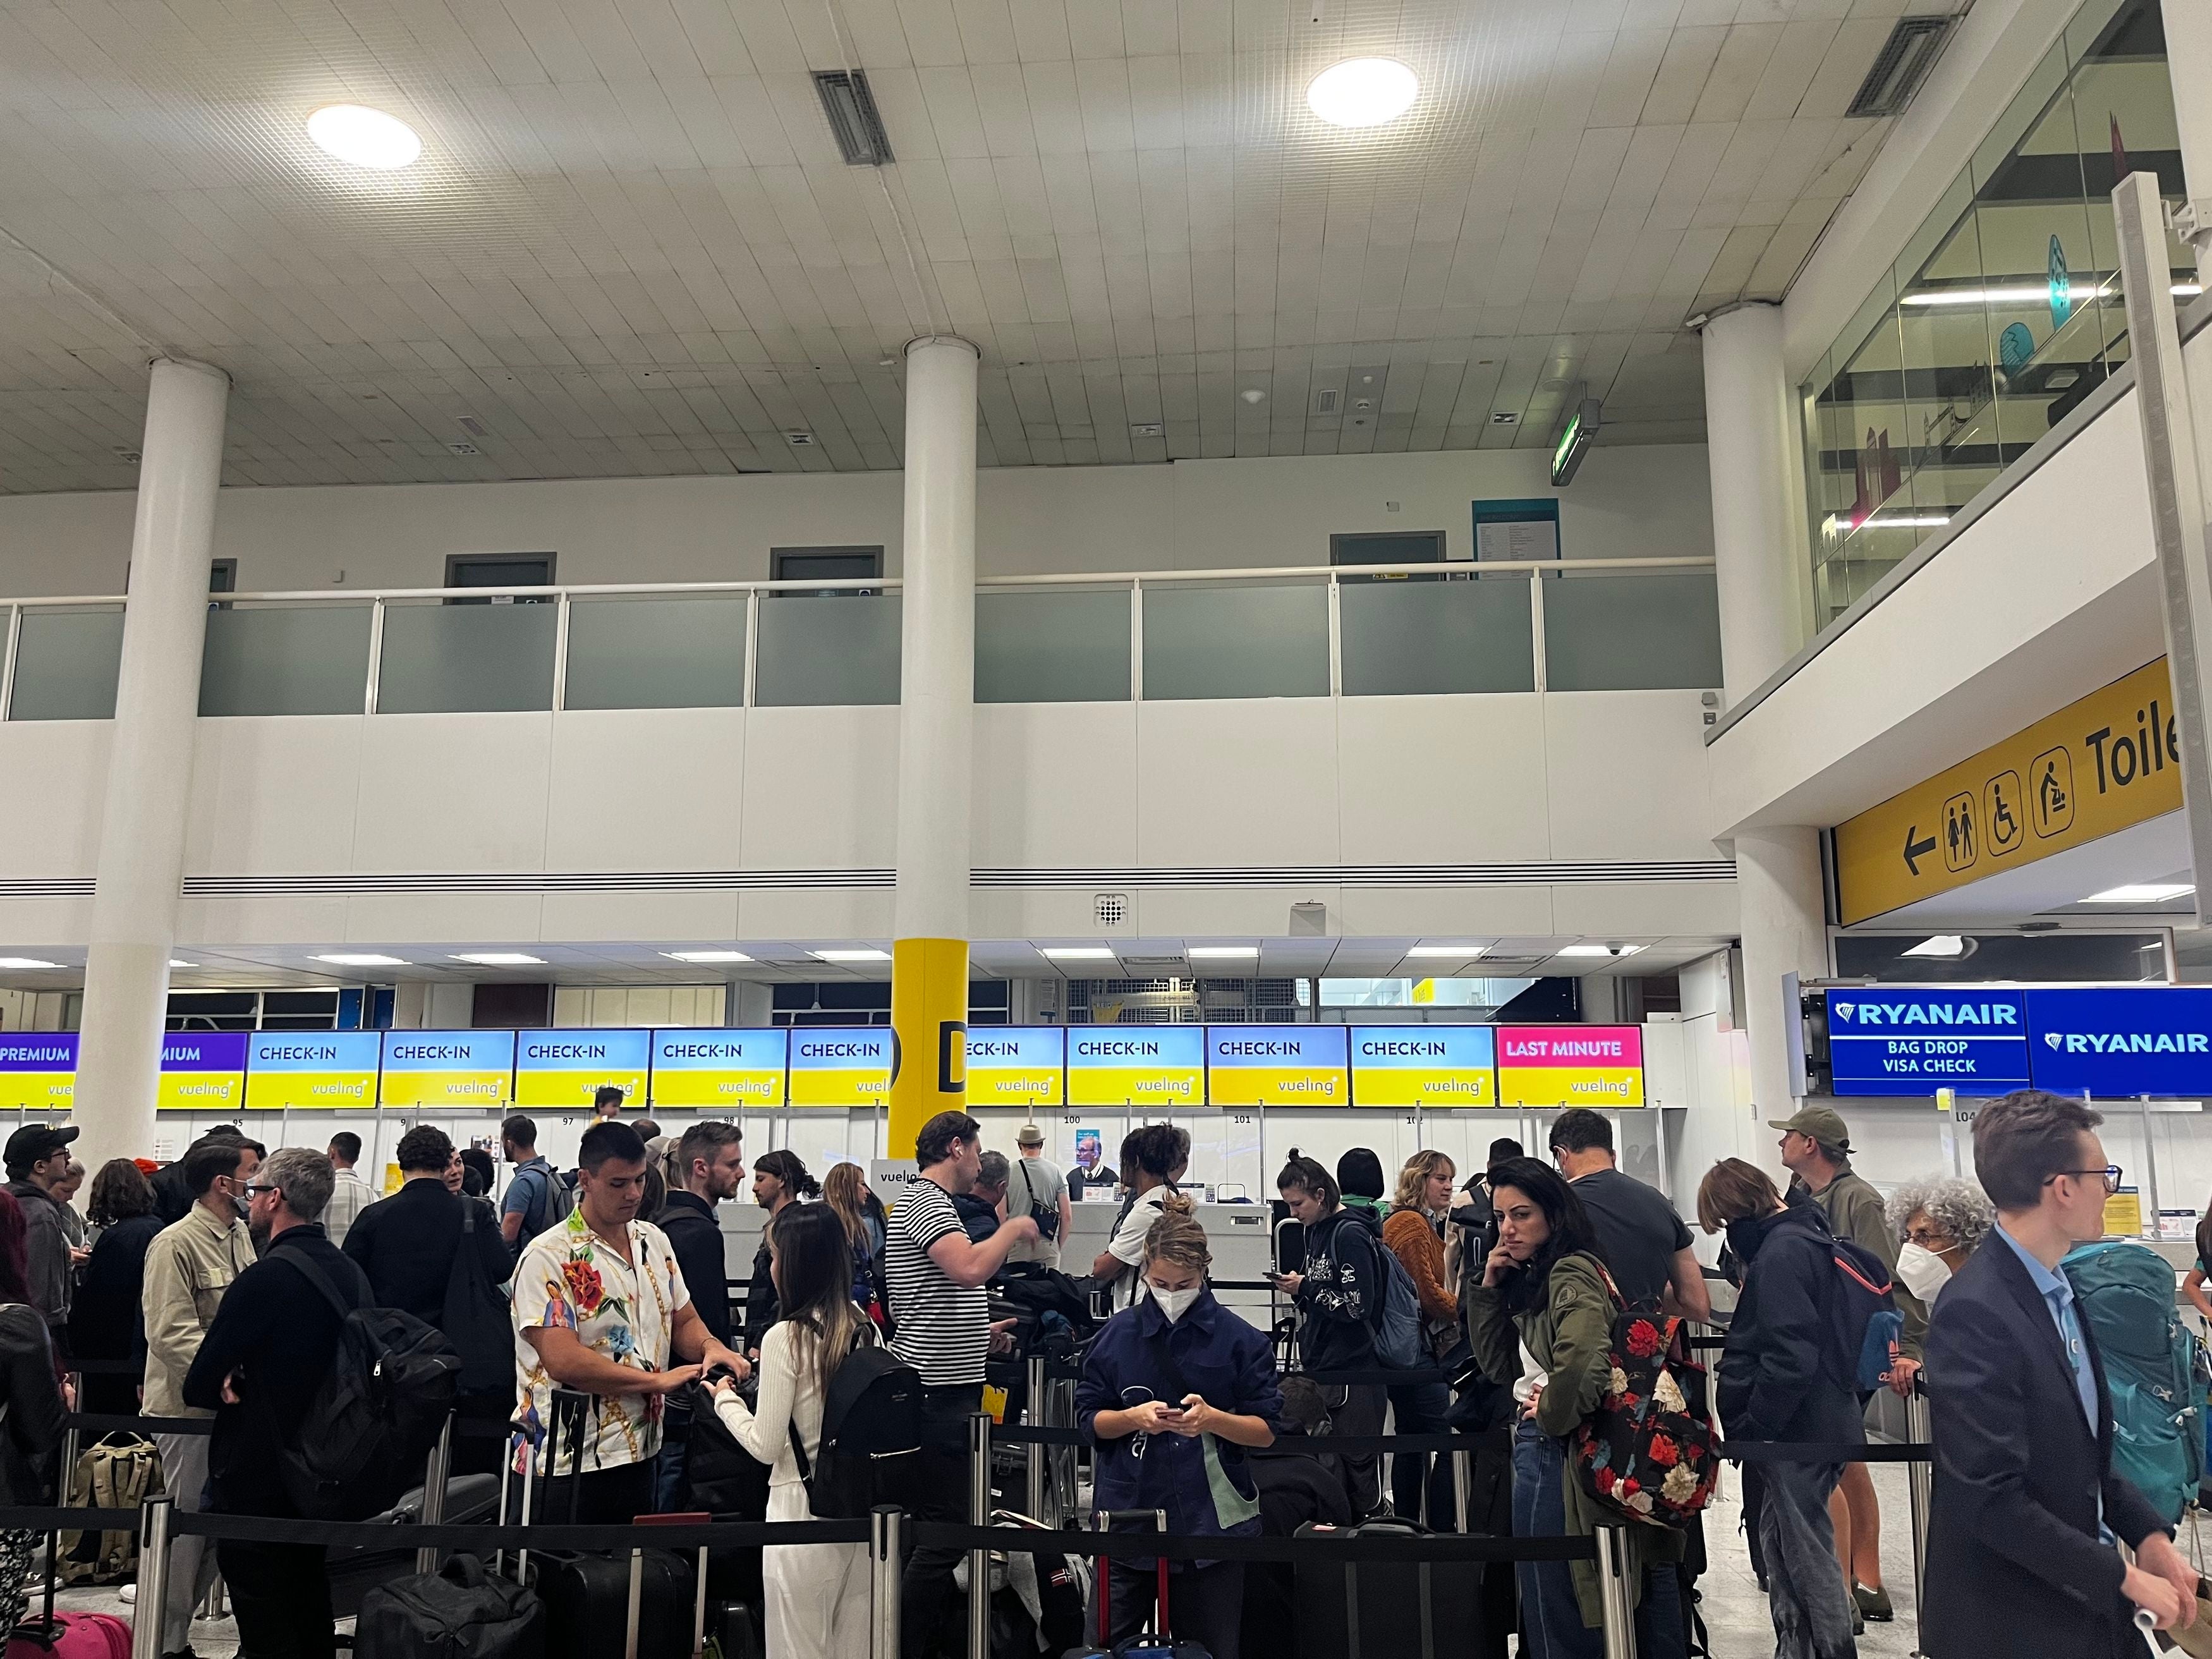 Queues at Gatwick airport during the chaos of flight cancellations